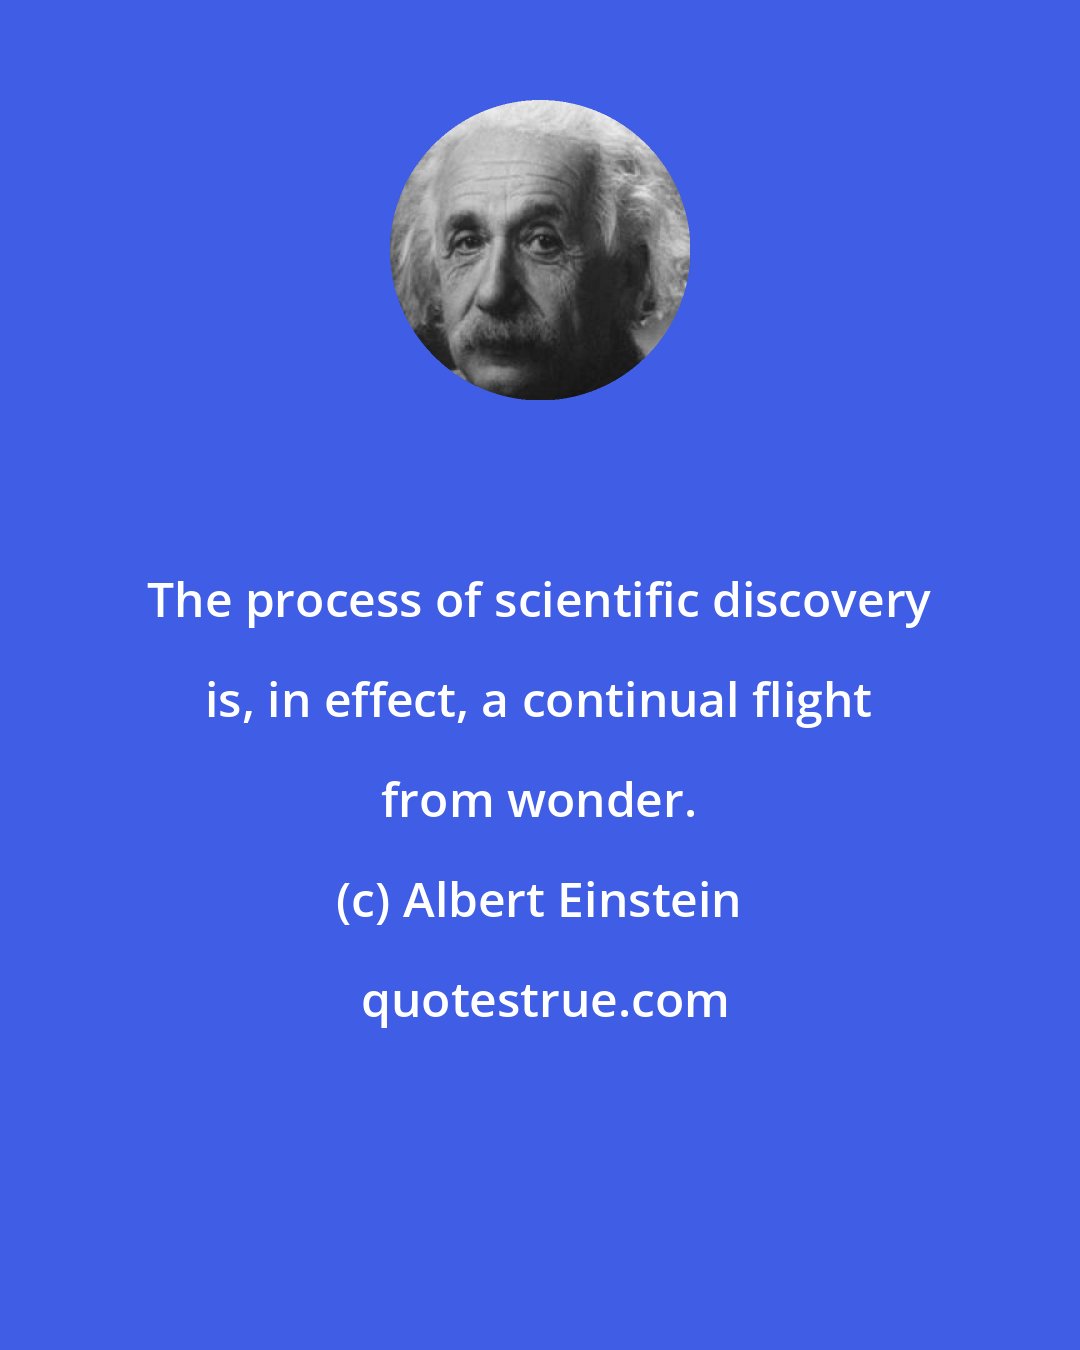 Albert Einstein: The process of scientific discovery is, in effect, a continual flight from wonder.